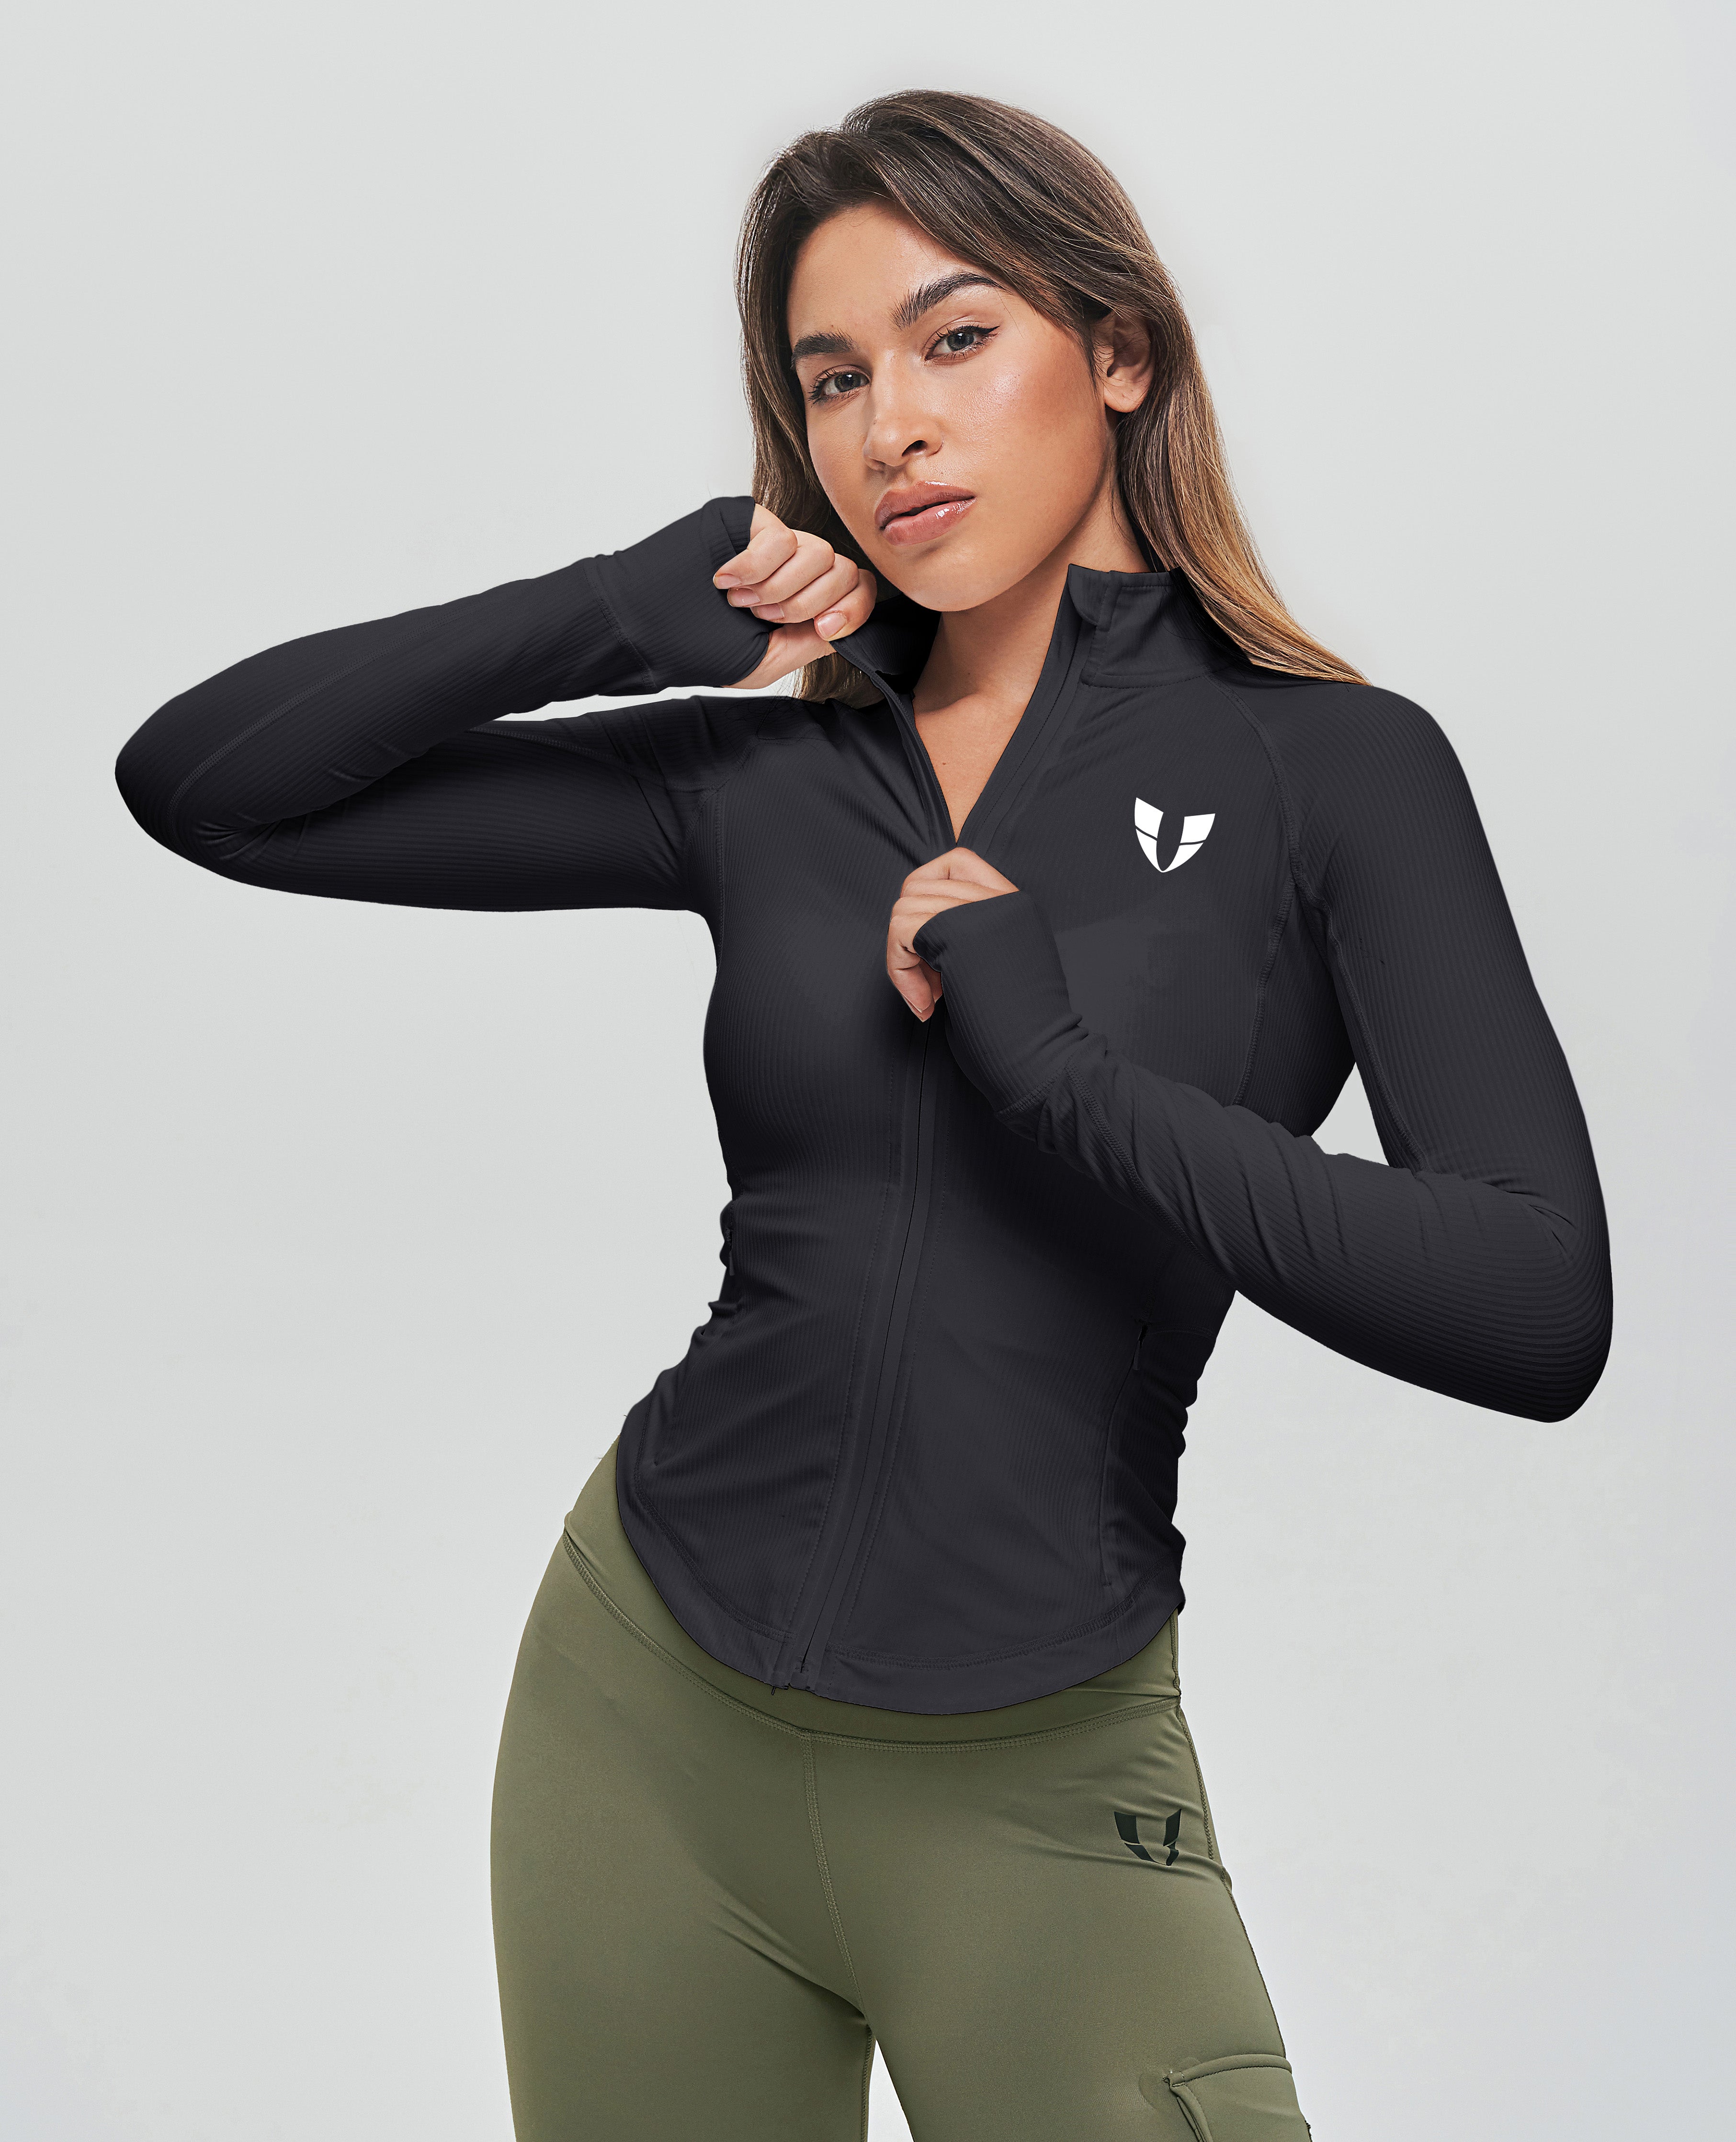 Zip Up Long Sleeve Cropped Activewear Sports Top Jacket